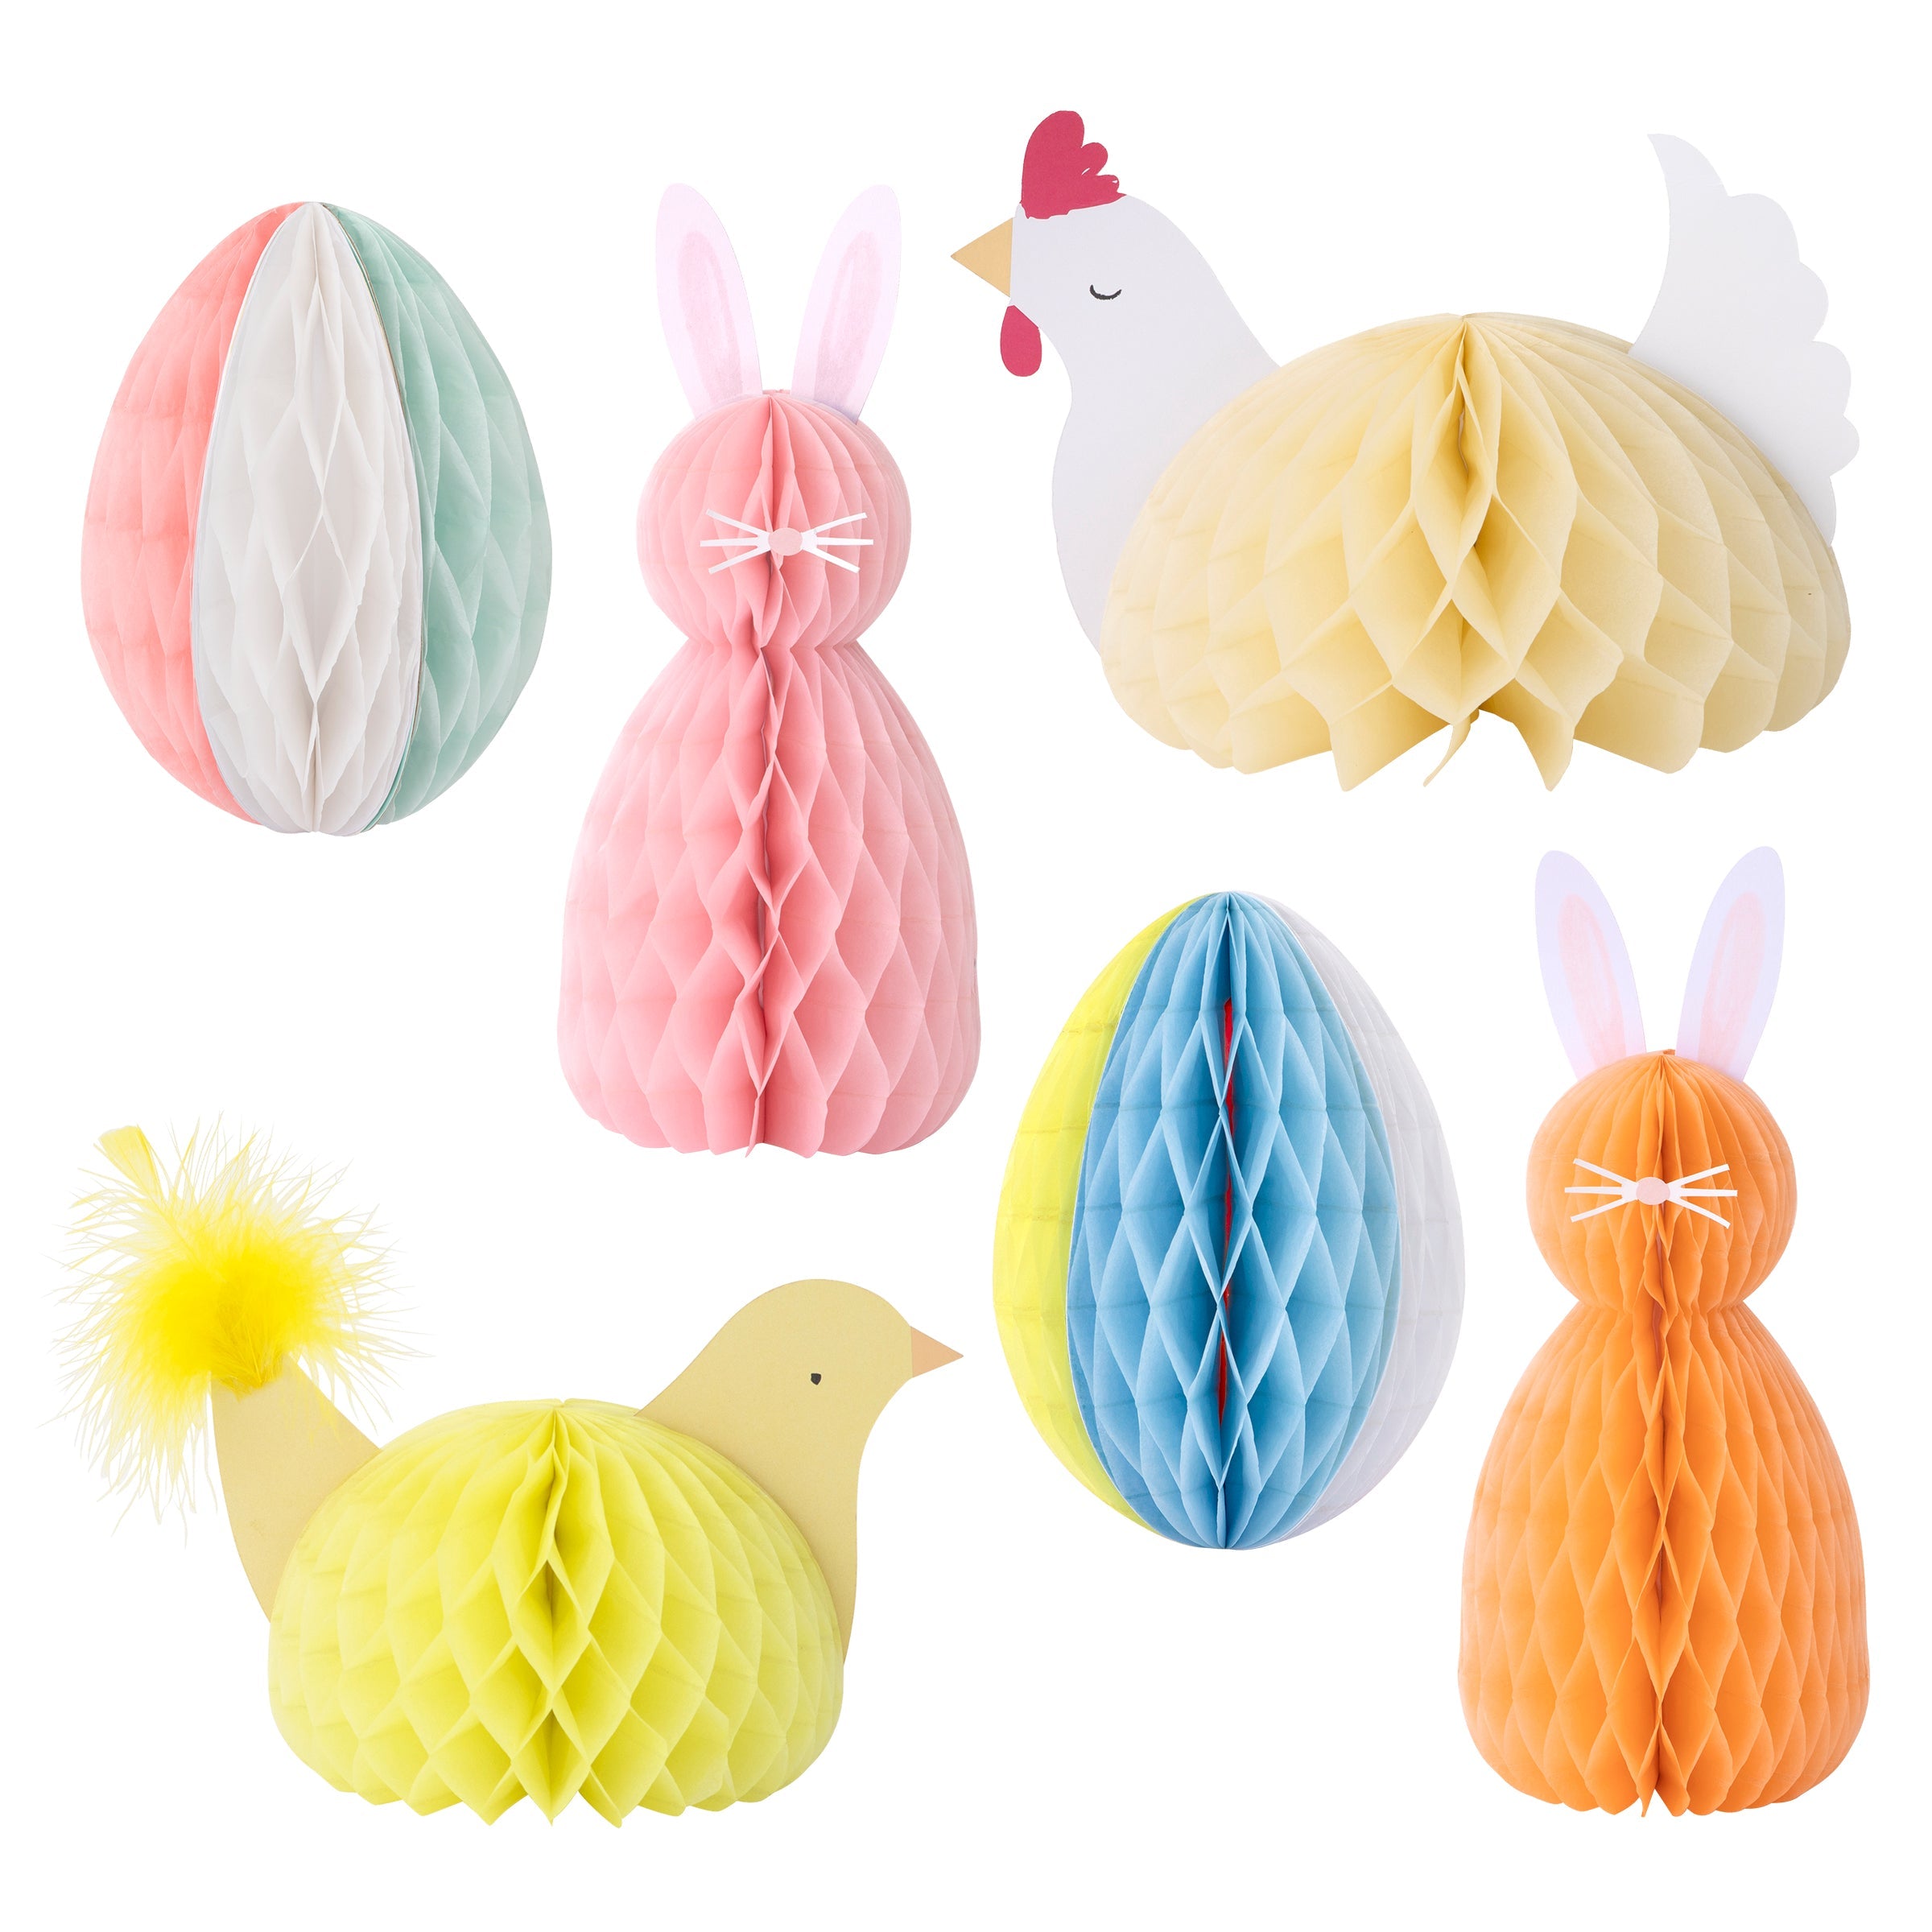 Our honeycomb decorations with chick decorations, bunny decorations and Easter egg decorations, are perfect for an Easter party.